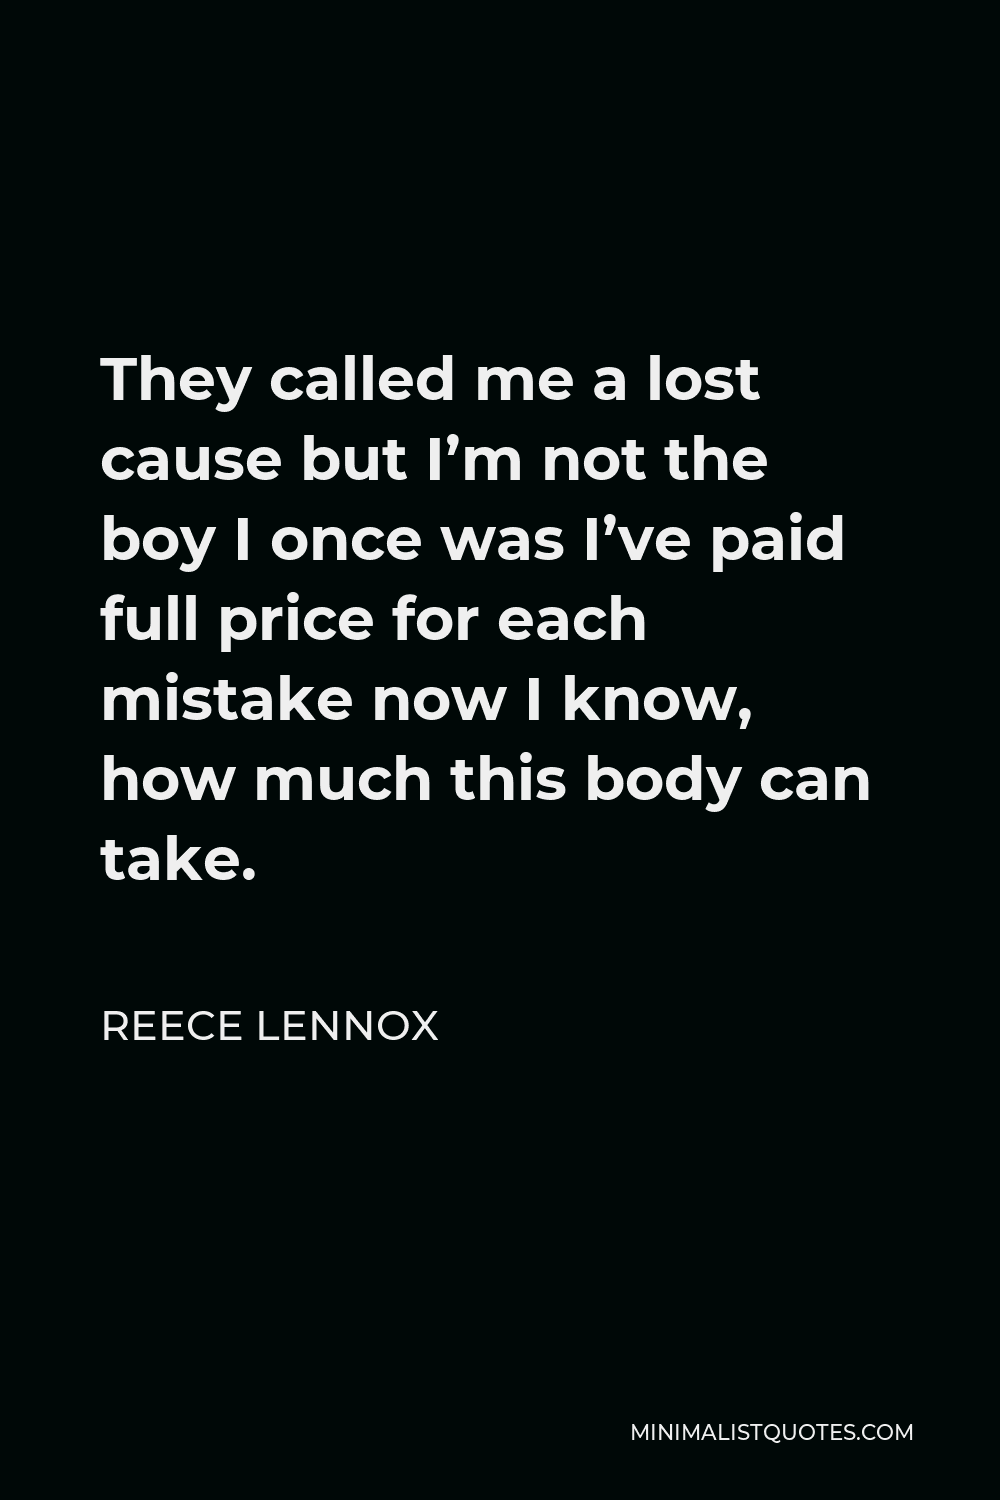 Reece Lennox Quote - They called me a lost cause but I’m not the boy I once was I’ve paid full price for each mistake now I know, how much this body can take.